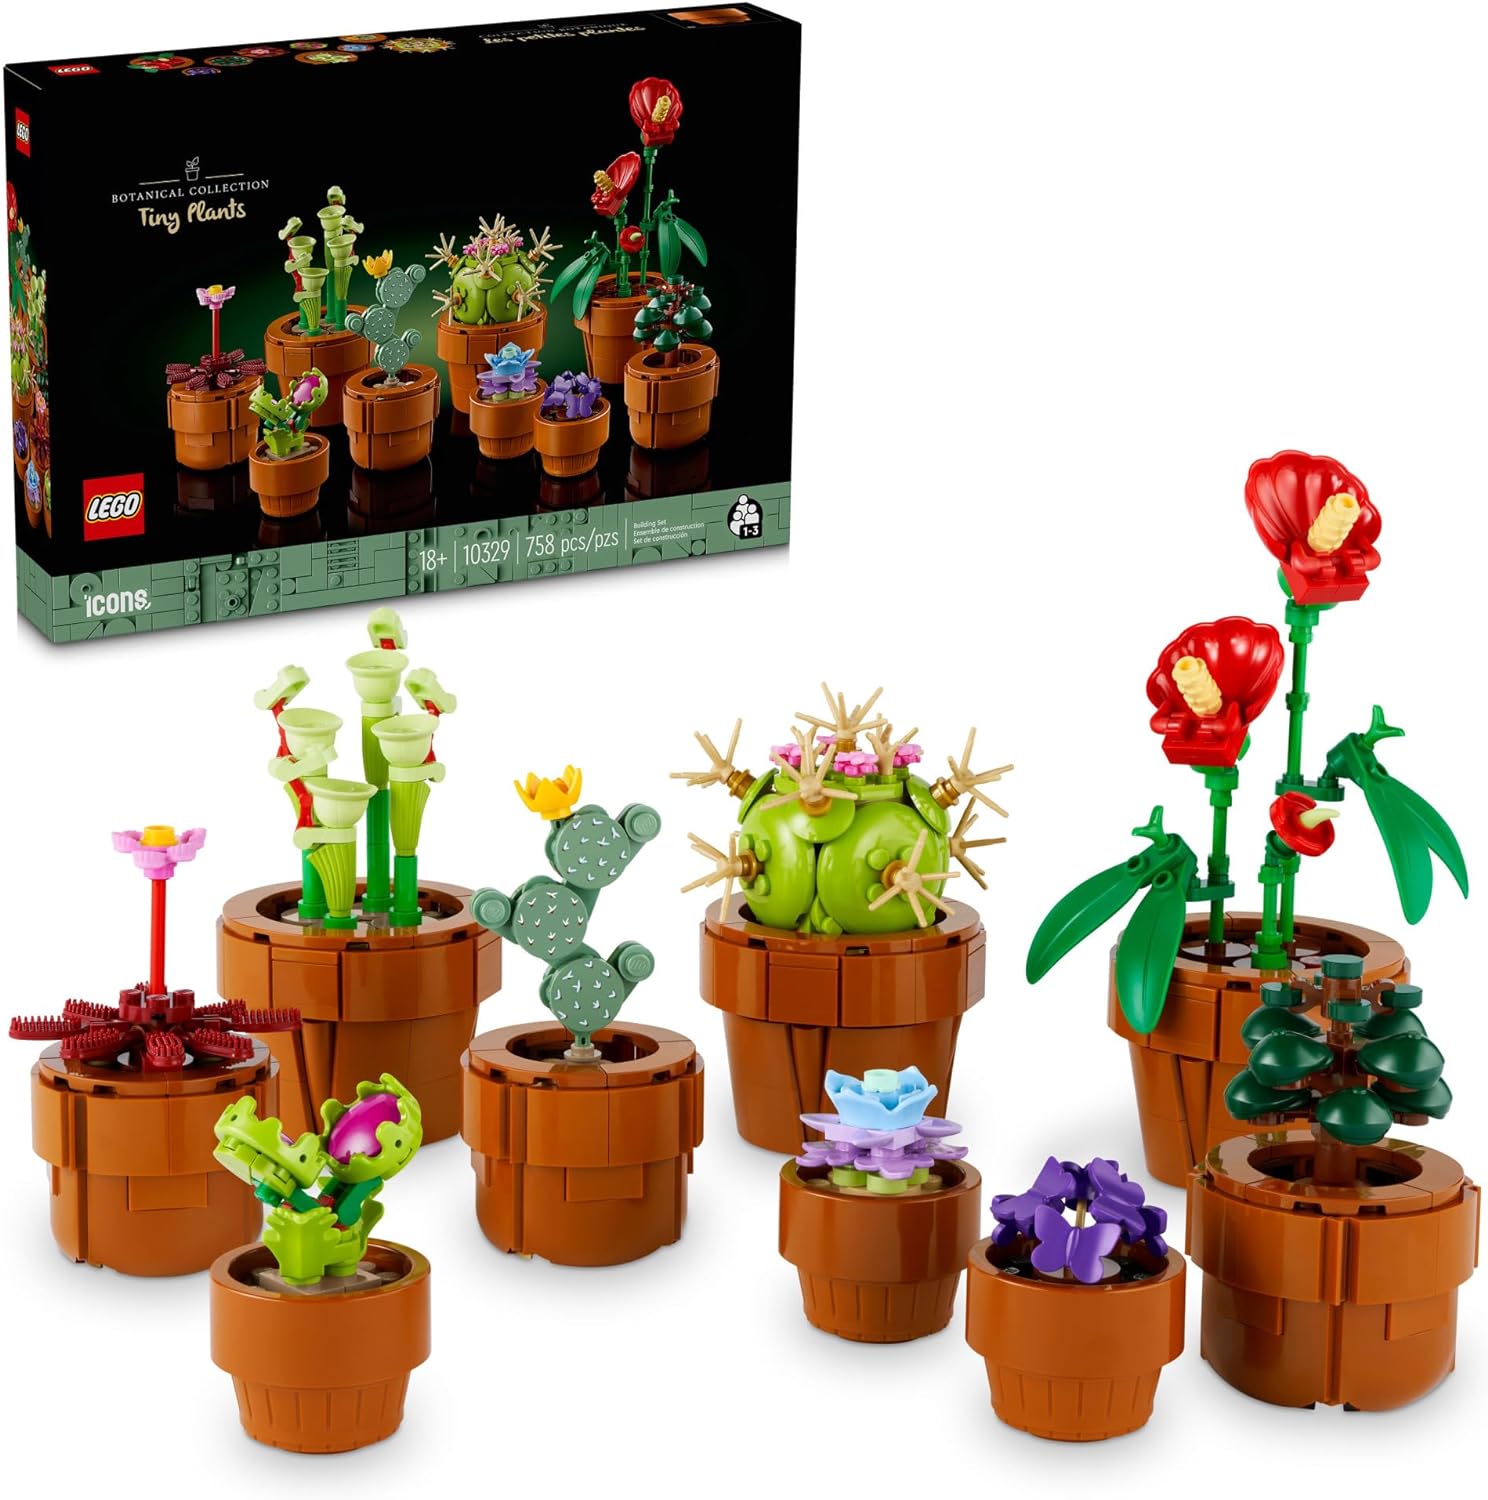 LEGO Icons 10329 Tiny Plants Building Set, Cactus Decor Gift Idea for Flower Lovers, Carnivorous, Tropical and Arid Flora, Botanical Collection